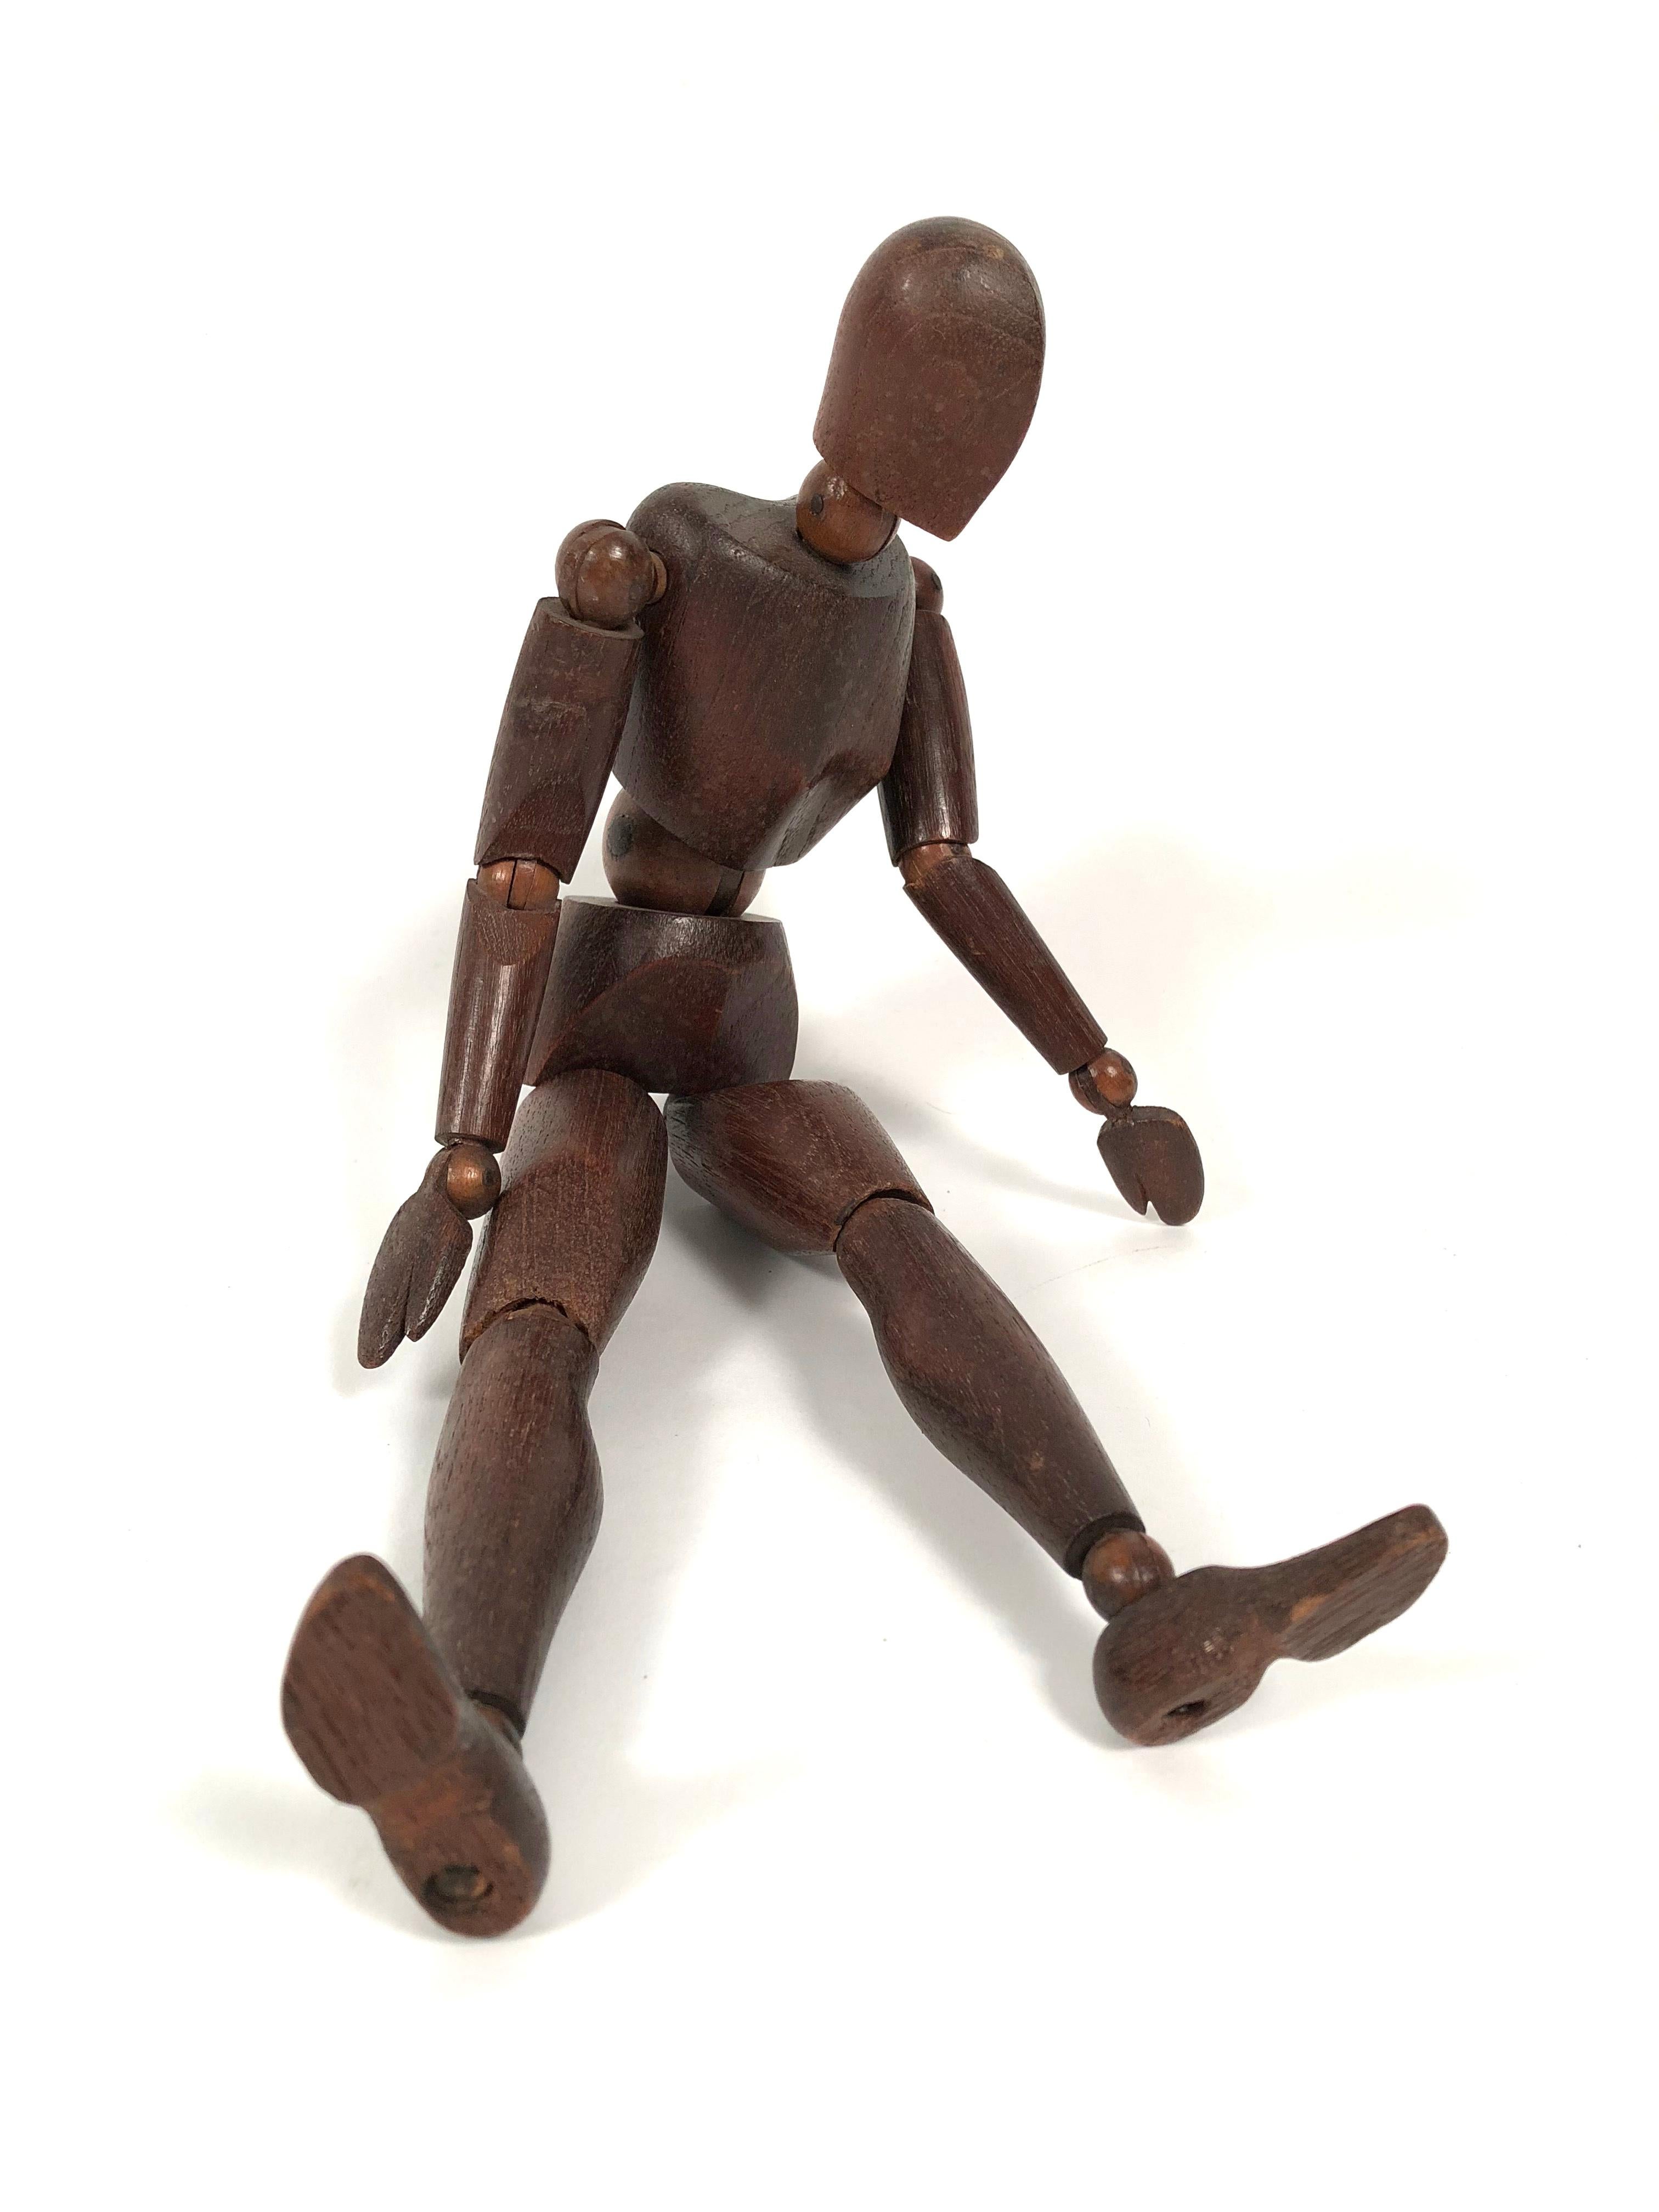 An antique carved walnut articulated artist's figure model, with 14 moveable ball joints and stylized hands and feet. Beautiful as sculpture on a table or book shelf.
   